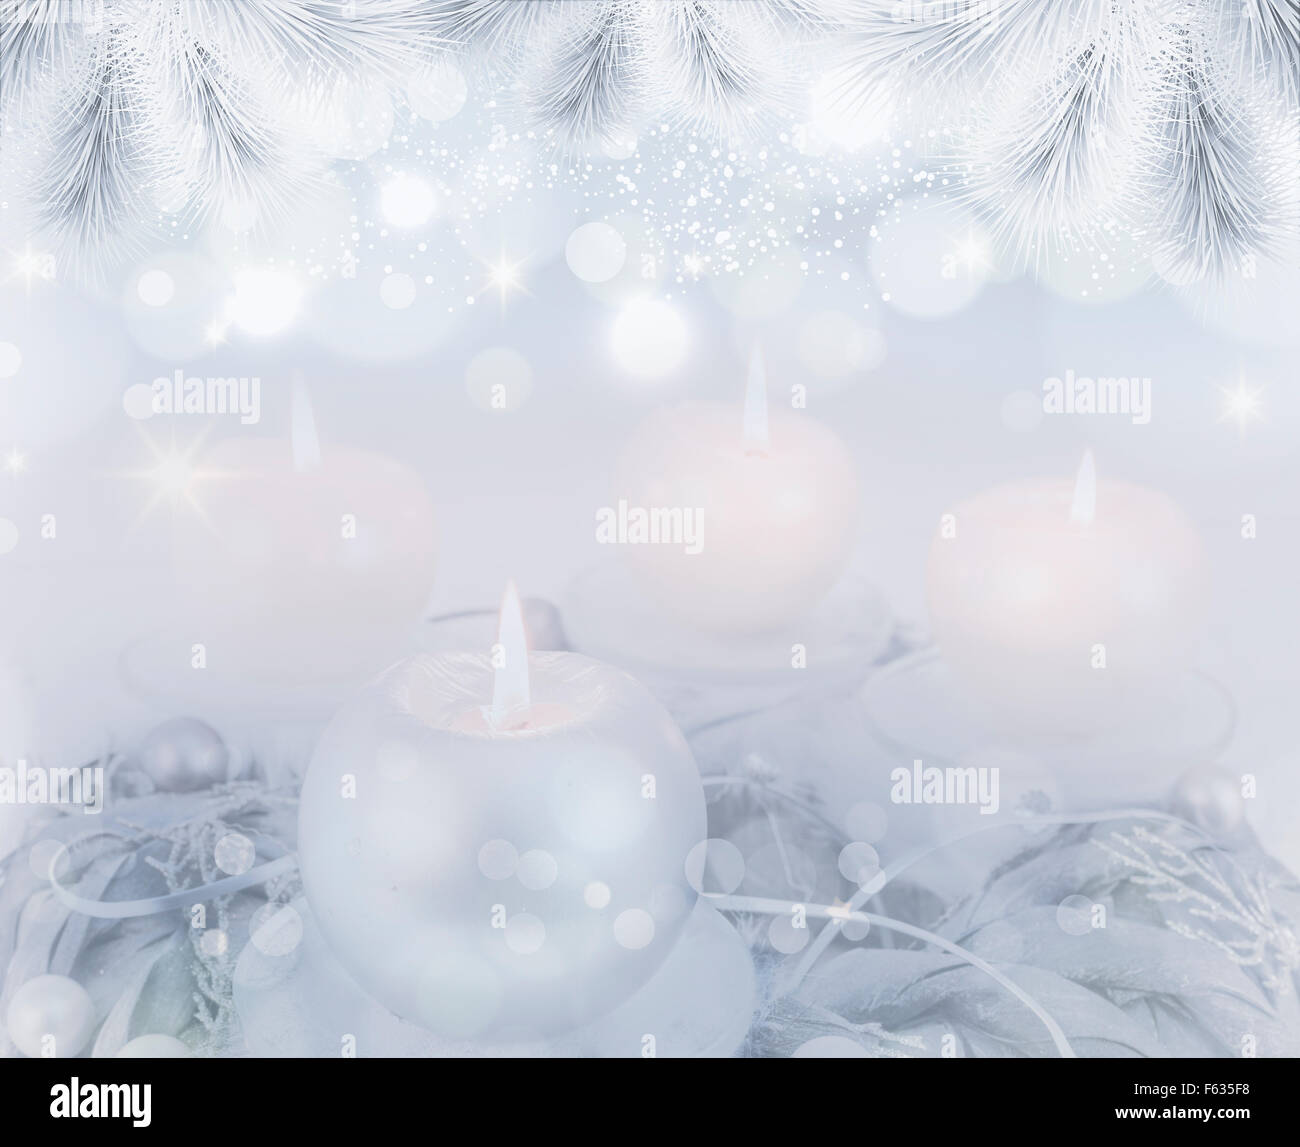 Silver advent wreath with 4 metallic candles on blue backround Stock Photo